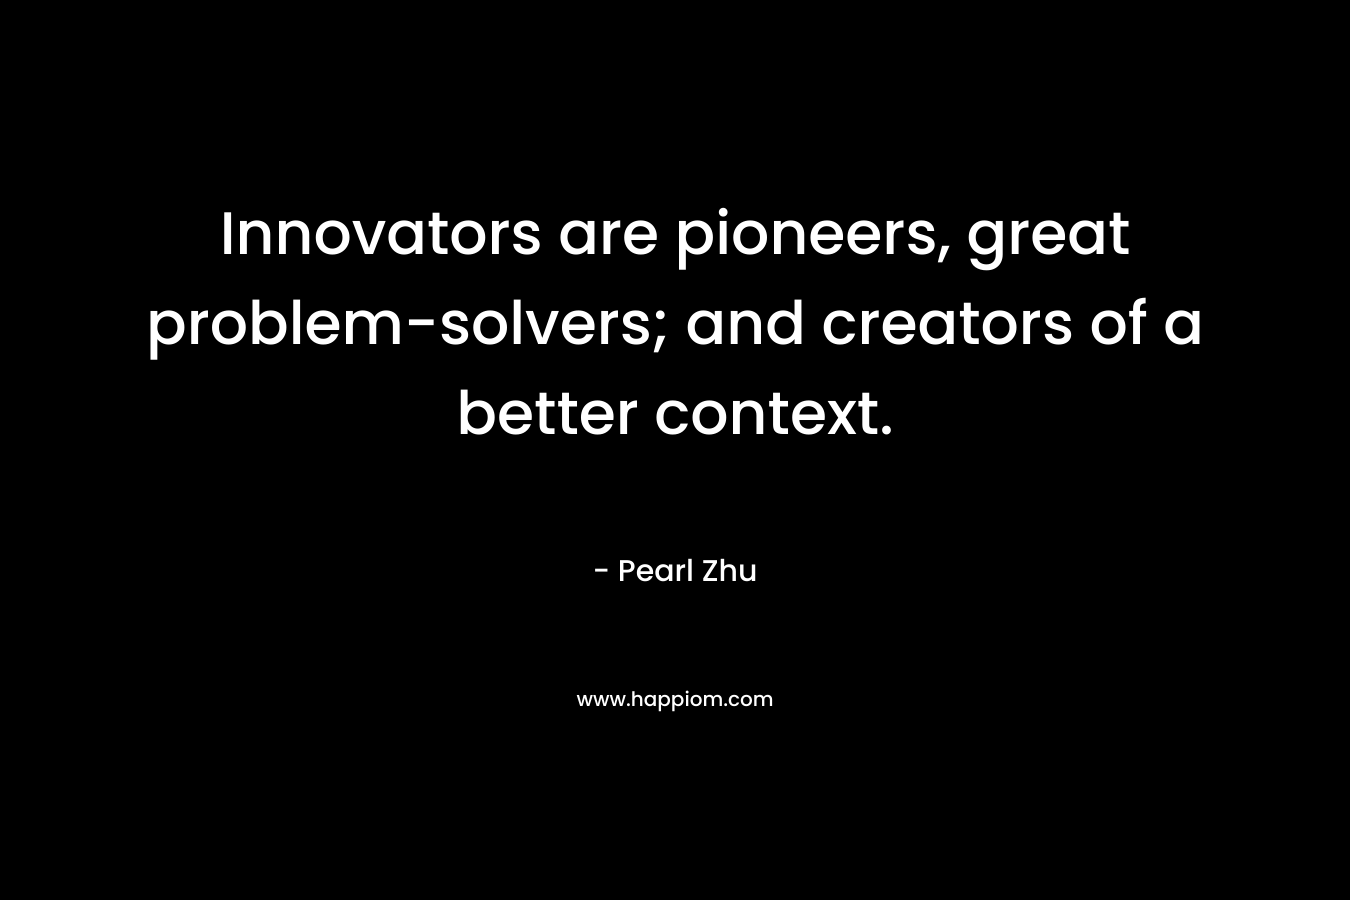 Innovators are pioneers, great problem-solvers; and creators of a better context. – Pearl Zhu